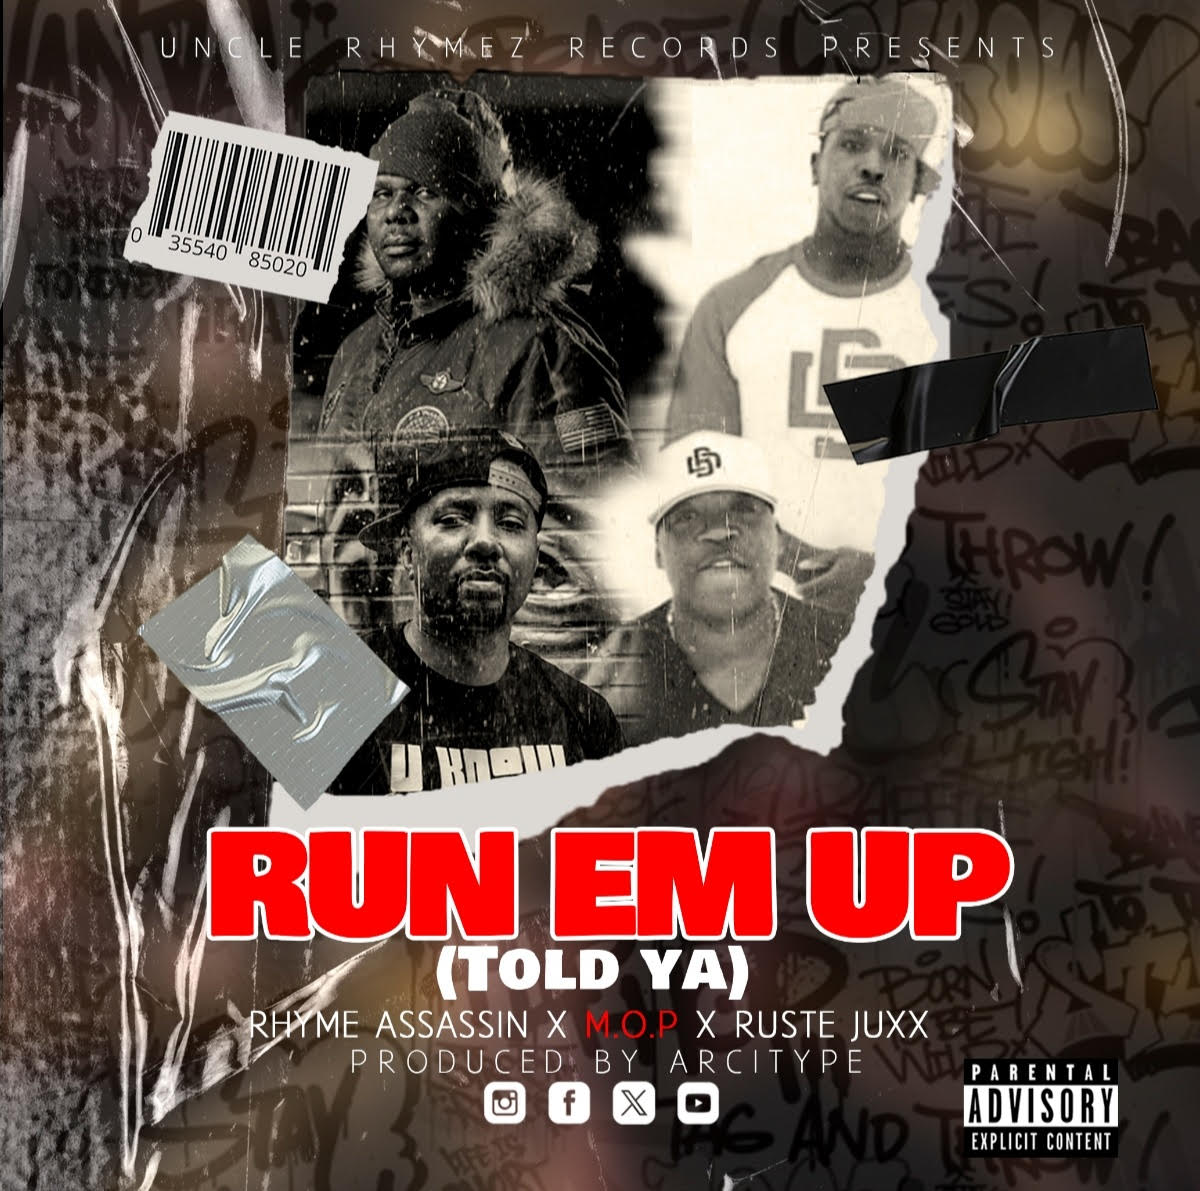 Check out my blog post Rhyme Assassin ft. M.O.P. & Ruste Juxx 'Run Em Up (Told Ya)' #newblogpost Subscribe to Heritagehiphop.com for more. @rhymeassasin @TheMashOutPosse @rustejuxx357 @TheArcitype wix.to/9U4Mjc5